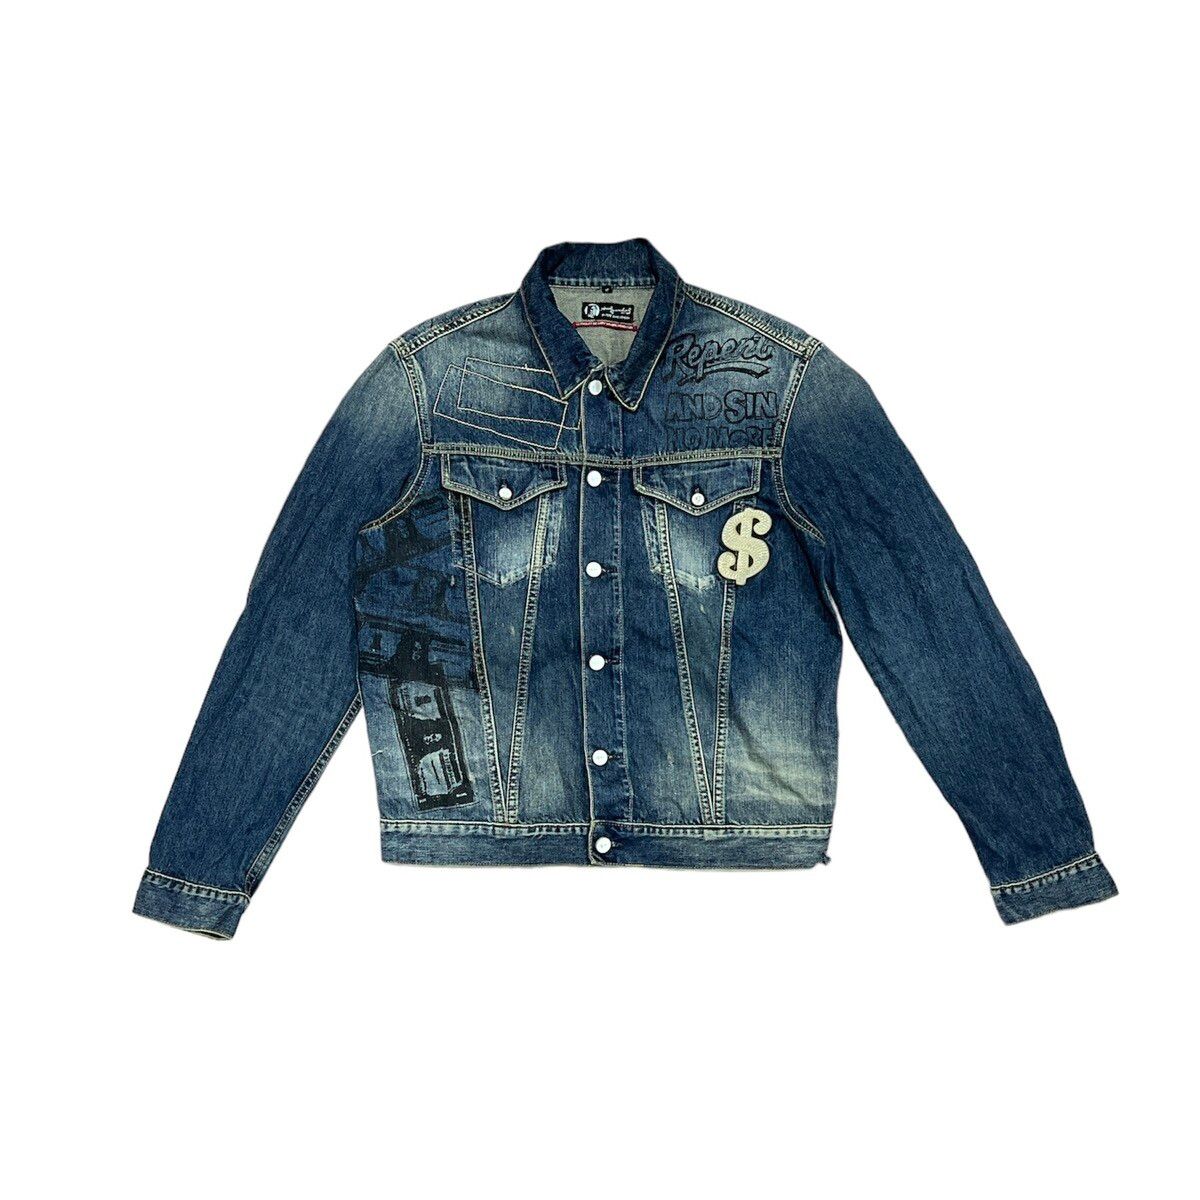 Andy Warhol by Pepe Jeans Type III Jacket - 1